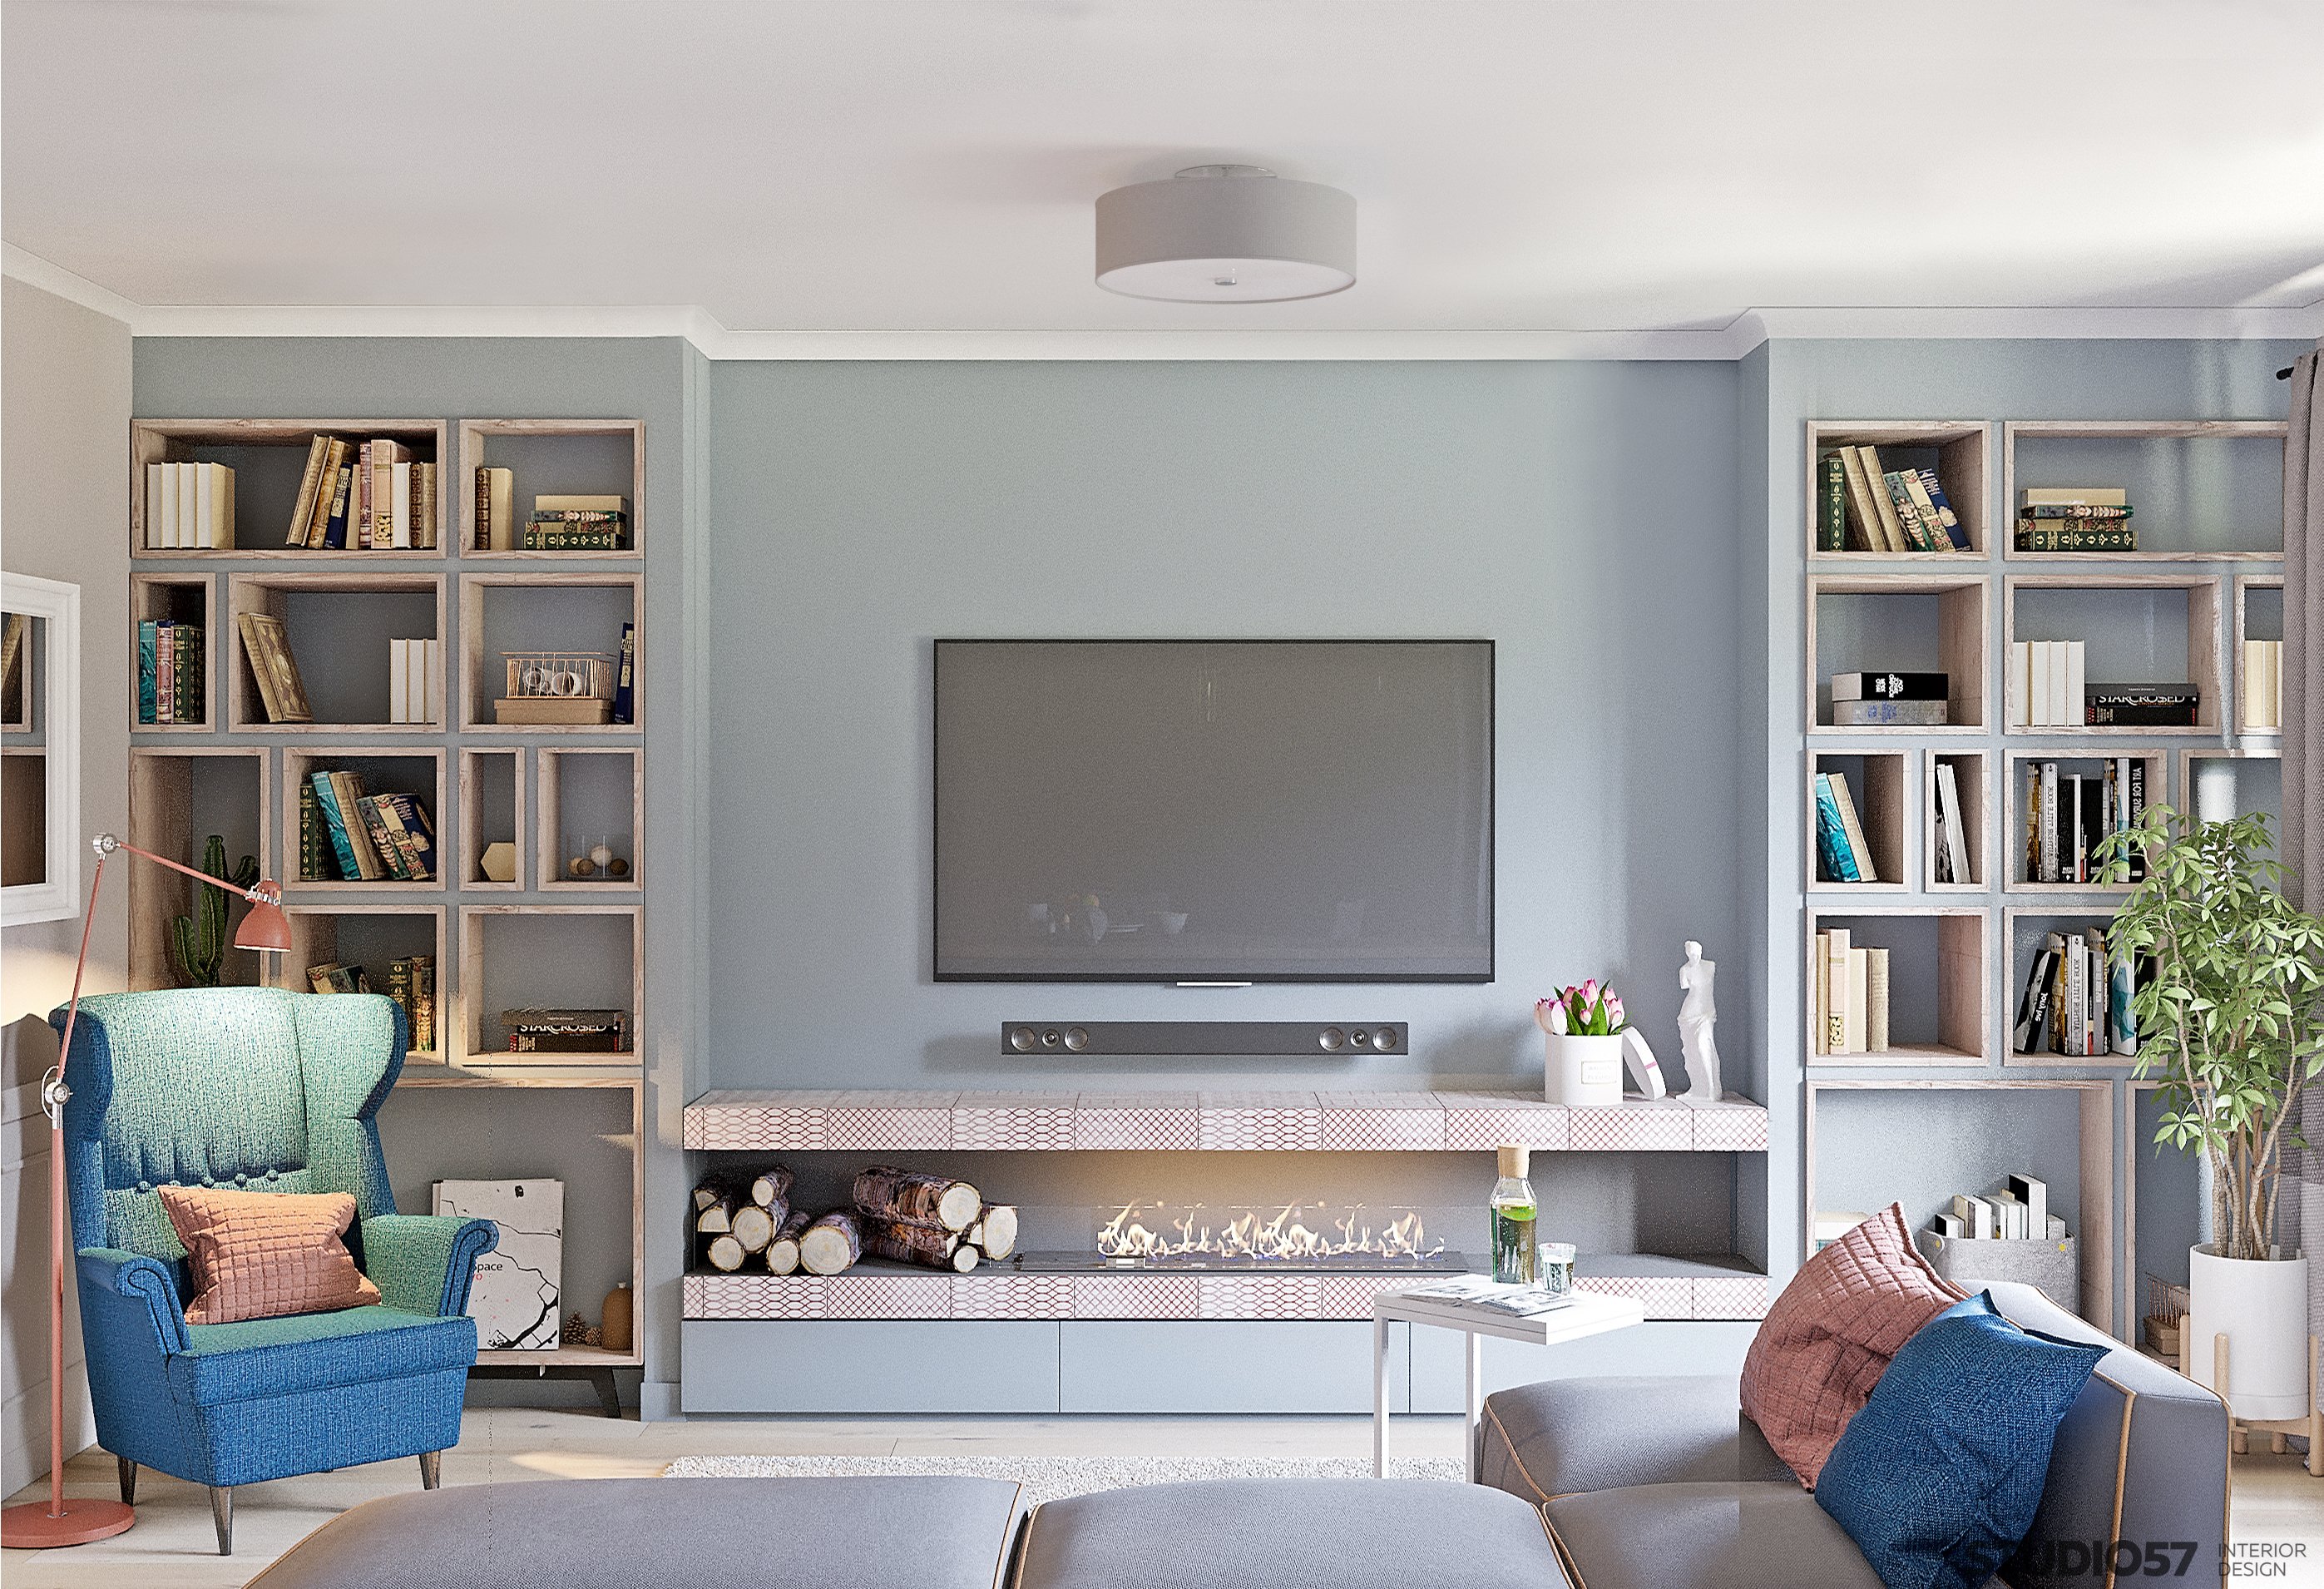 Built-in bookcase in the living room